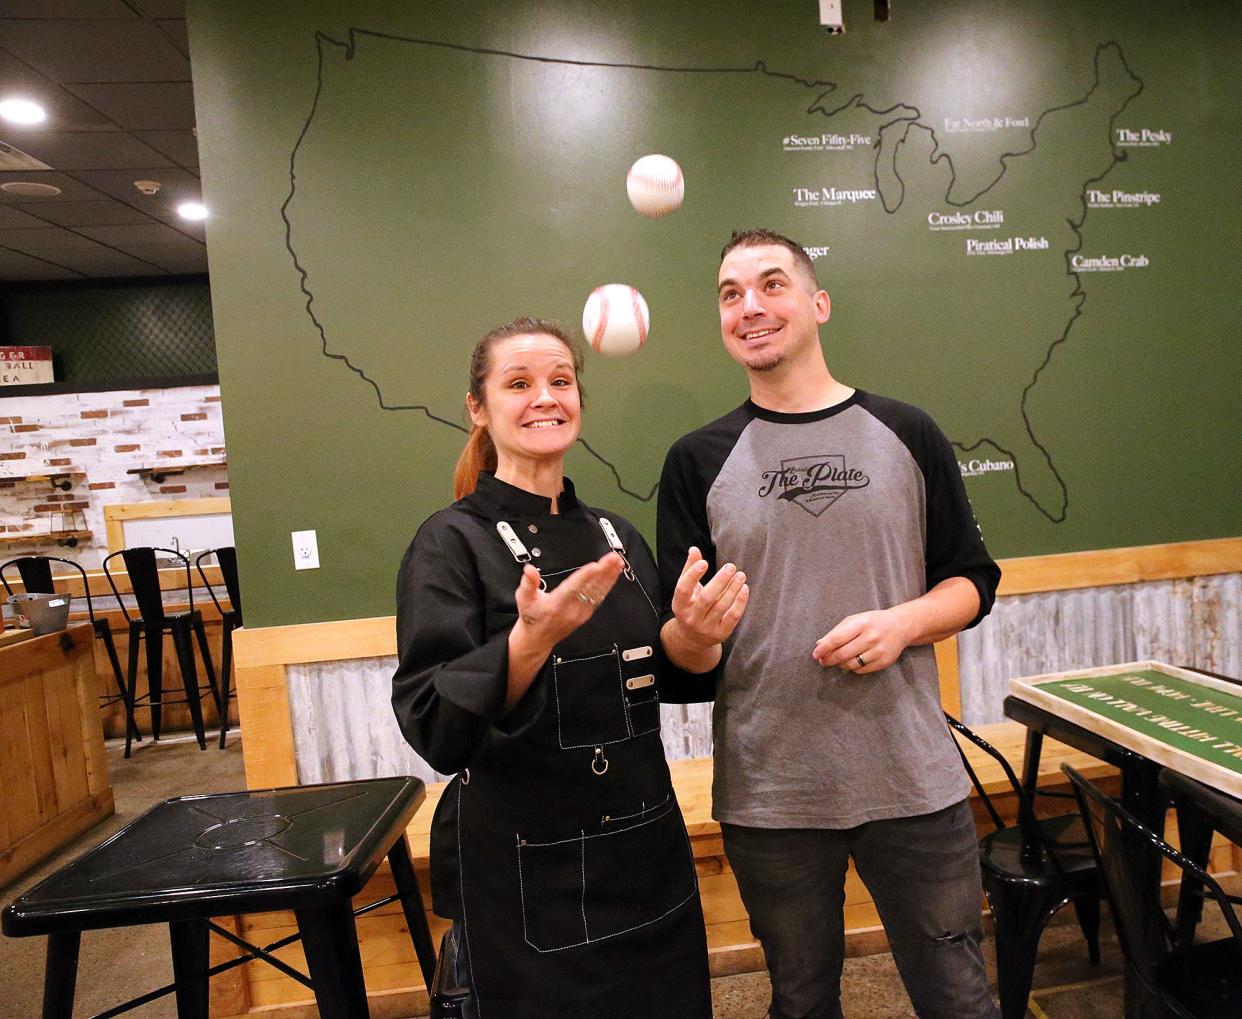 John and Martha Edwards bring baseball and food together at Behind the Plate on Islington Street in Portsmouth.